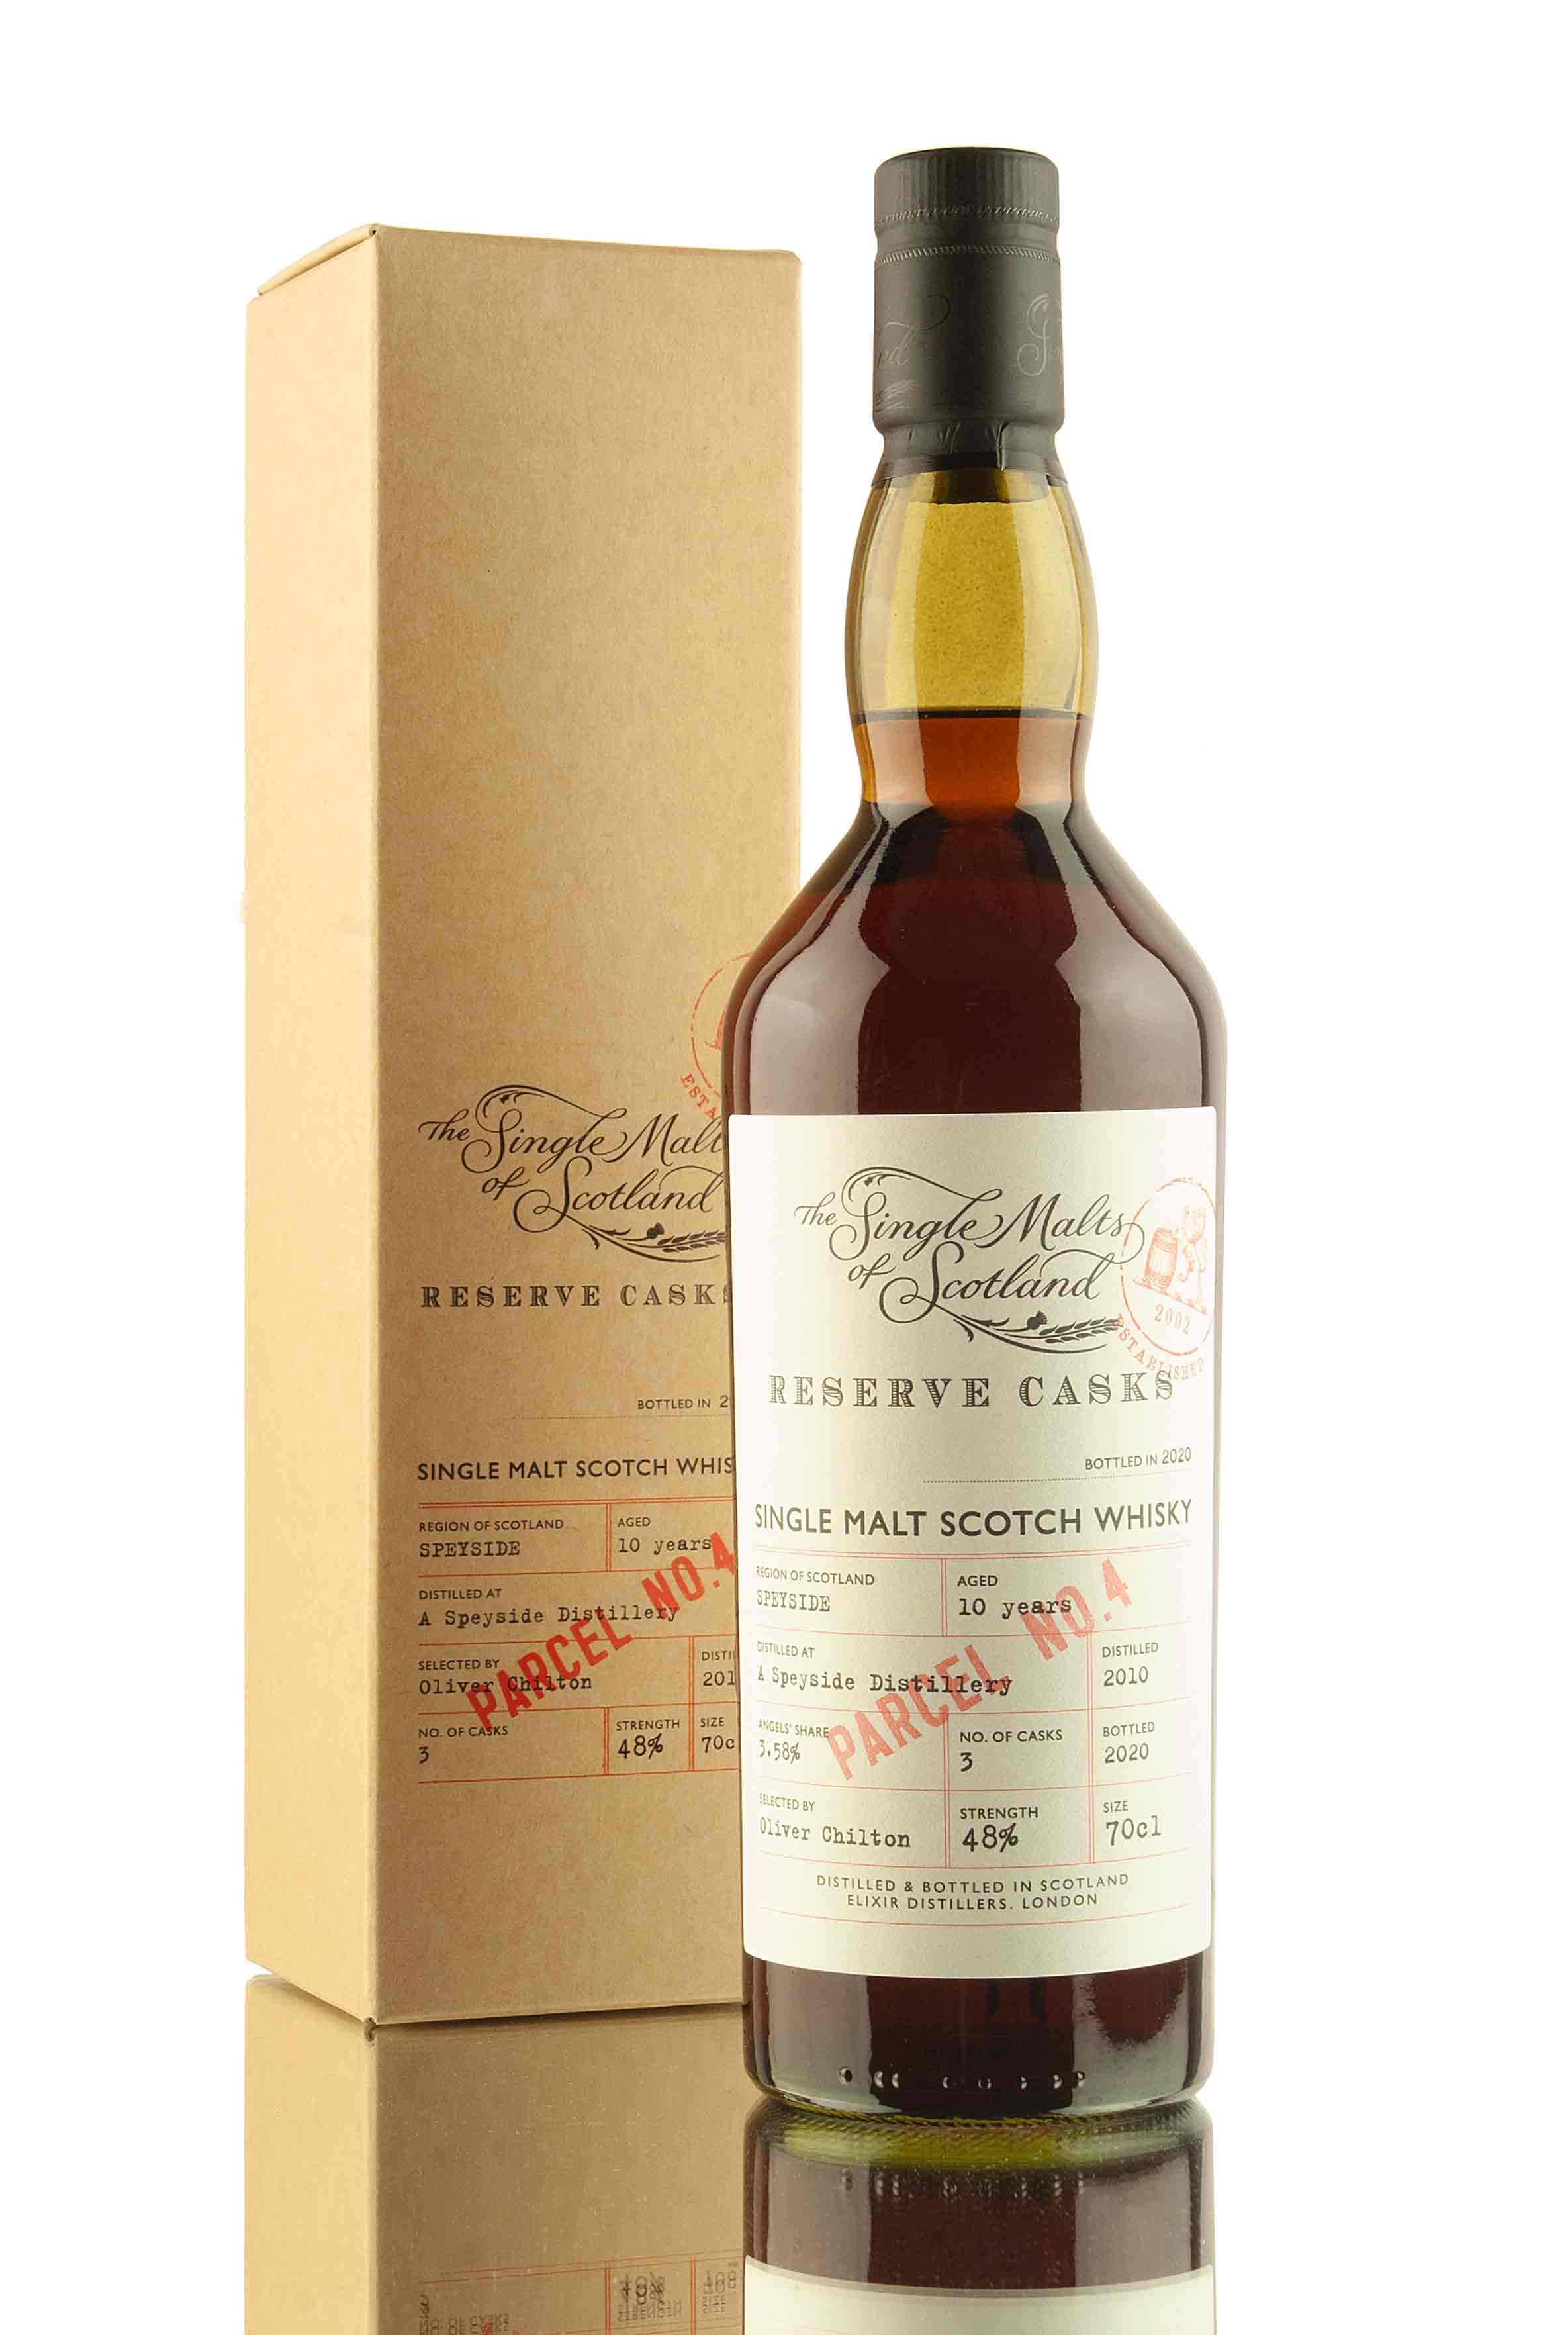 A Speyside Distillery 10 Year Old - 2010 | Reserve Casks Parcel No.4 | Abbey Whisky